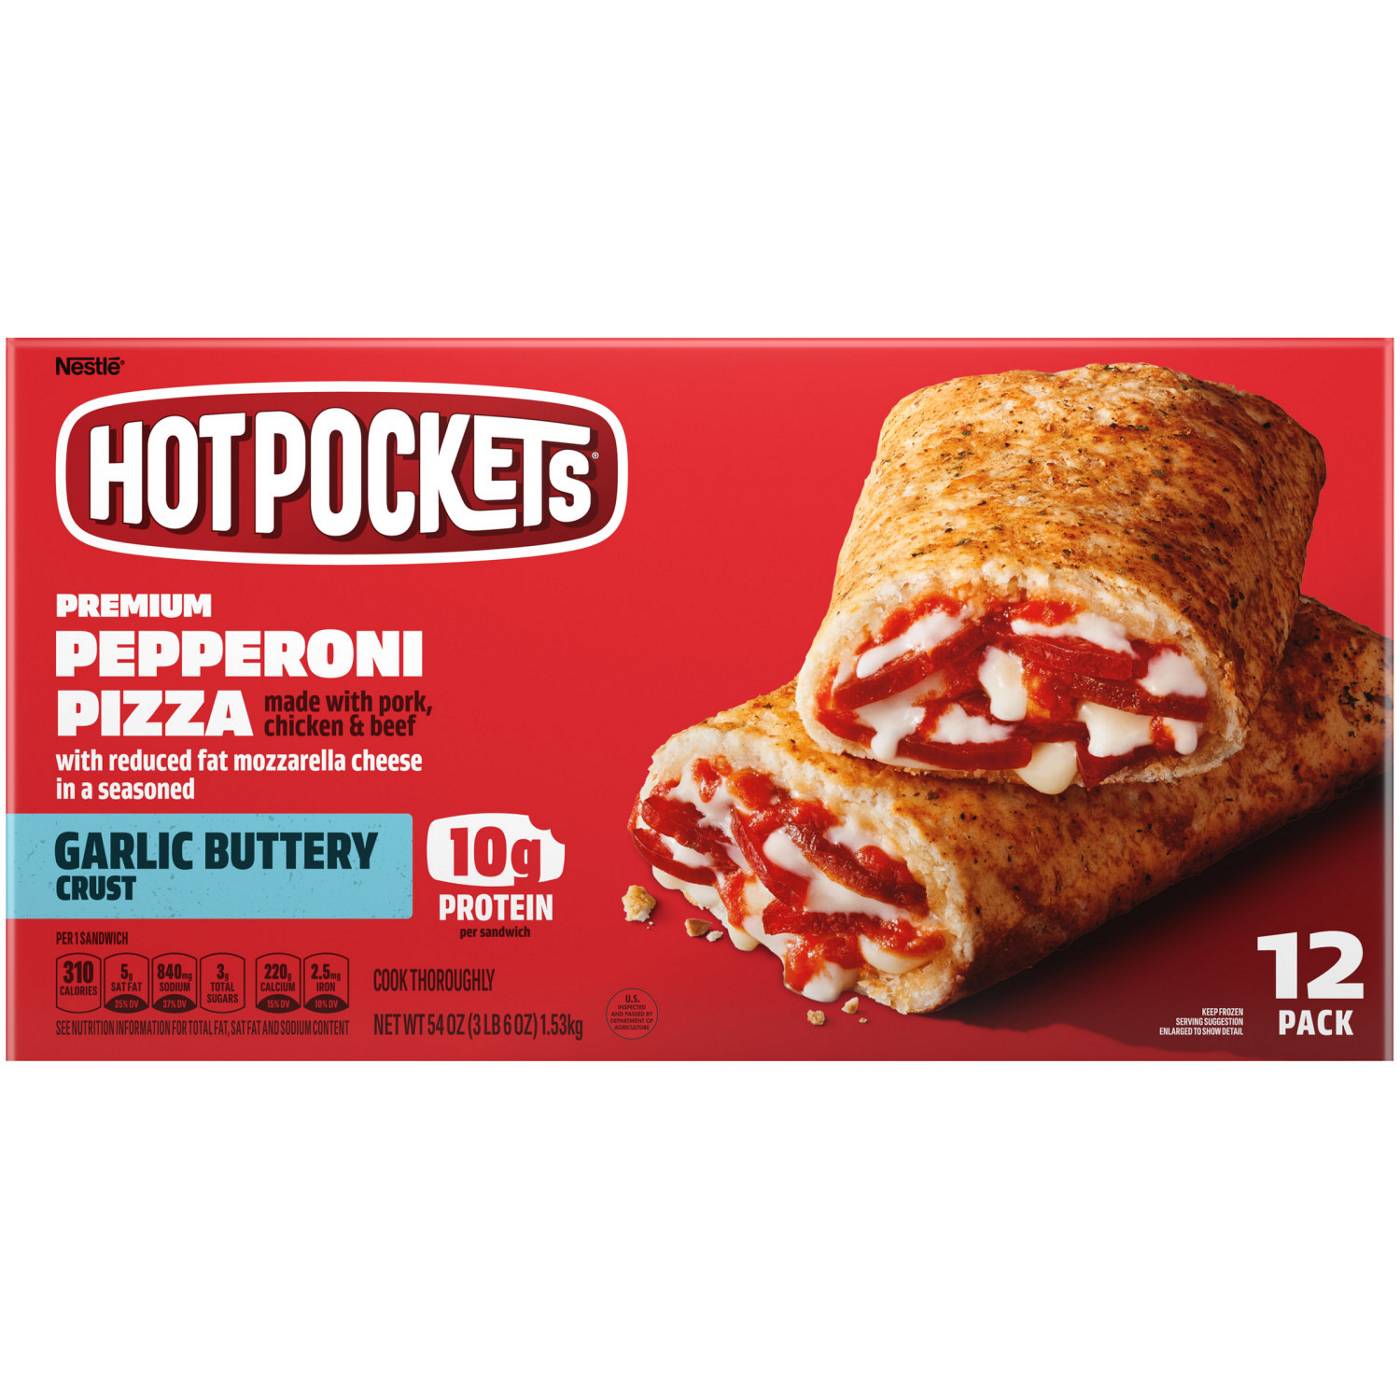 Hot Pockets Pepperoni Pizza Frozen Sandwiches - Garlic Buttery Crust; image 1 of 7